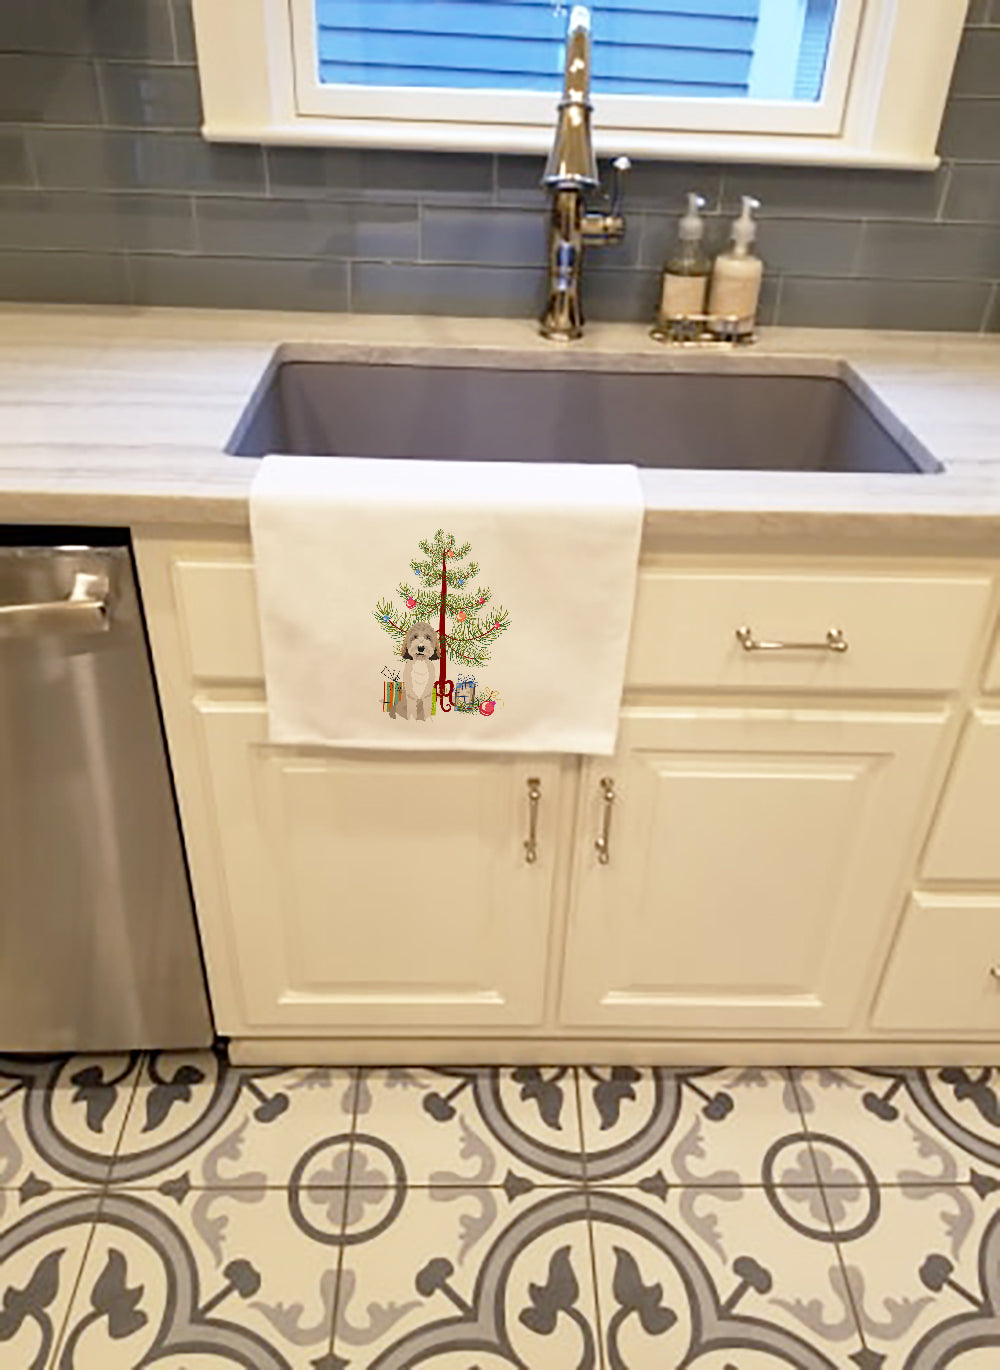 Buy this Doodle Tricolor #1 Christmas White Kitchen Towel Set of 2